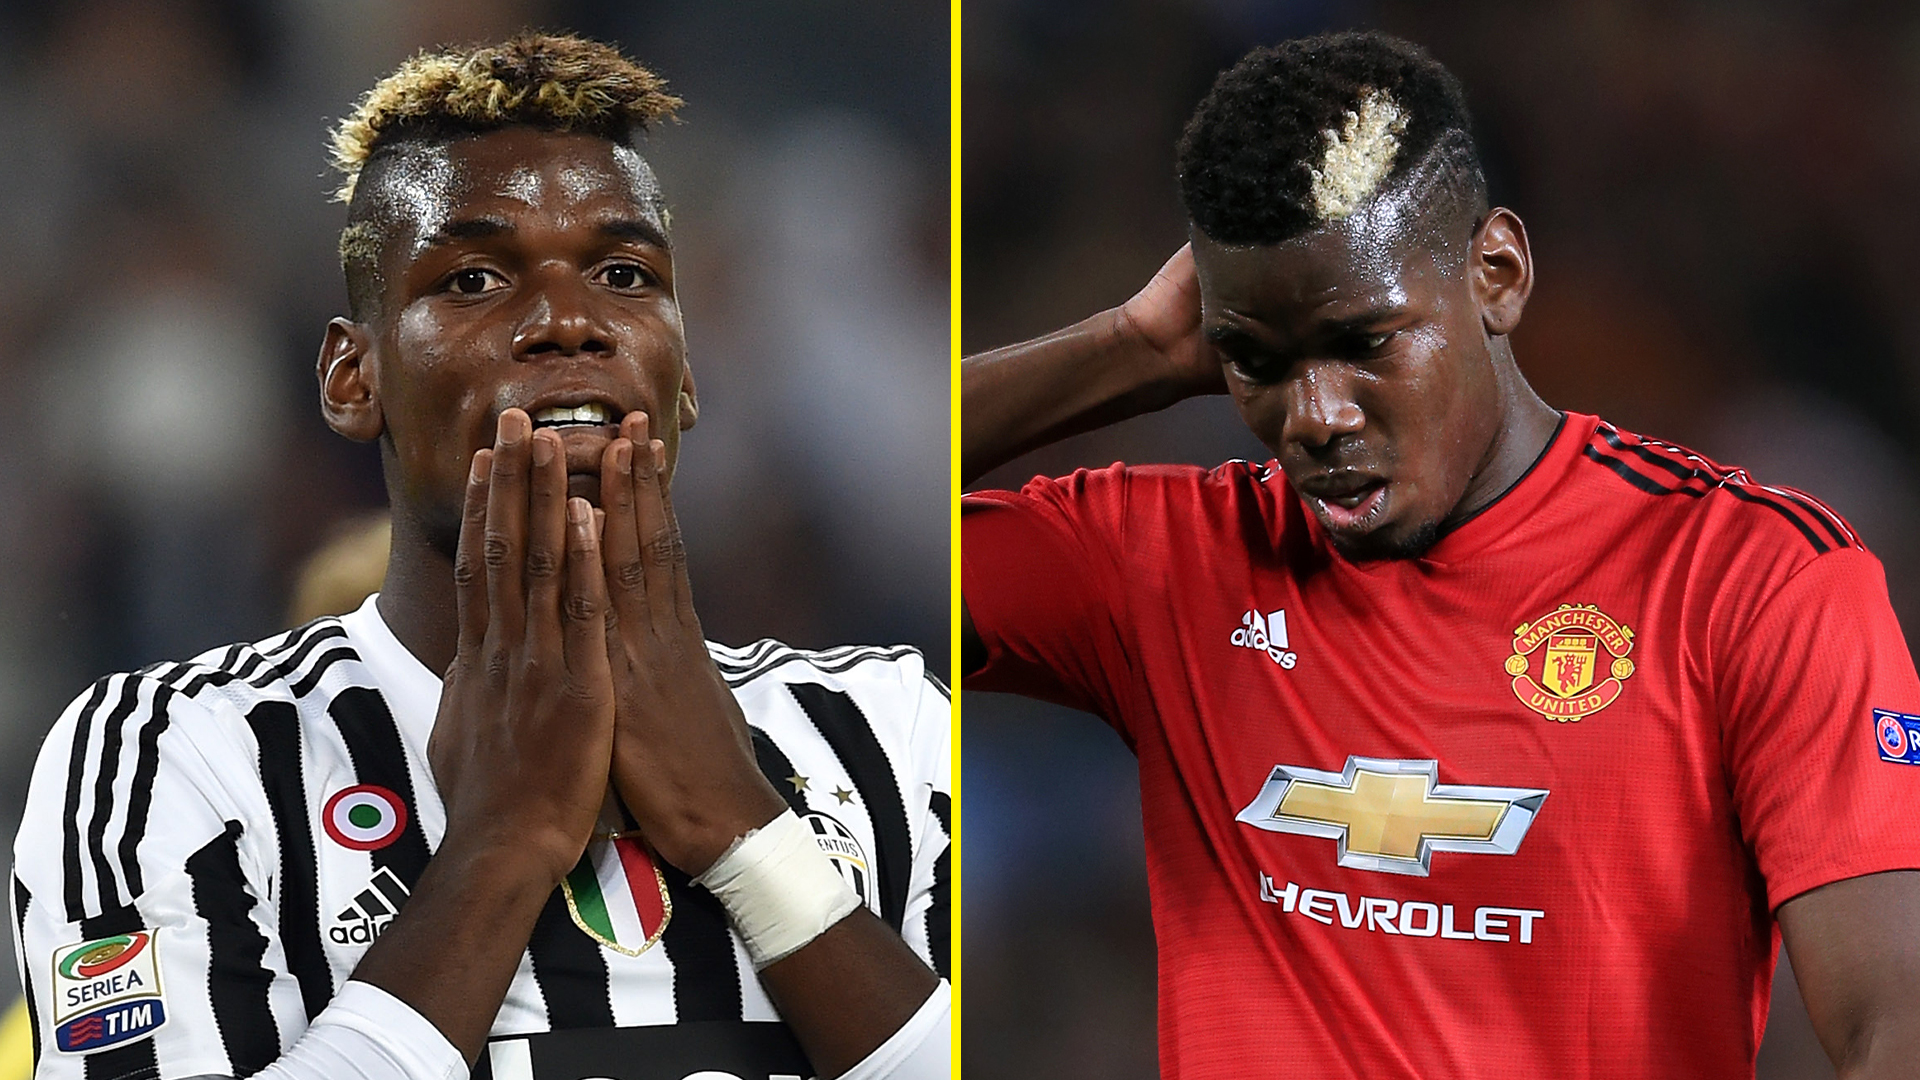 Italy's sports prosecutors request 4-year ban for Pogba - media